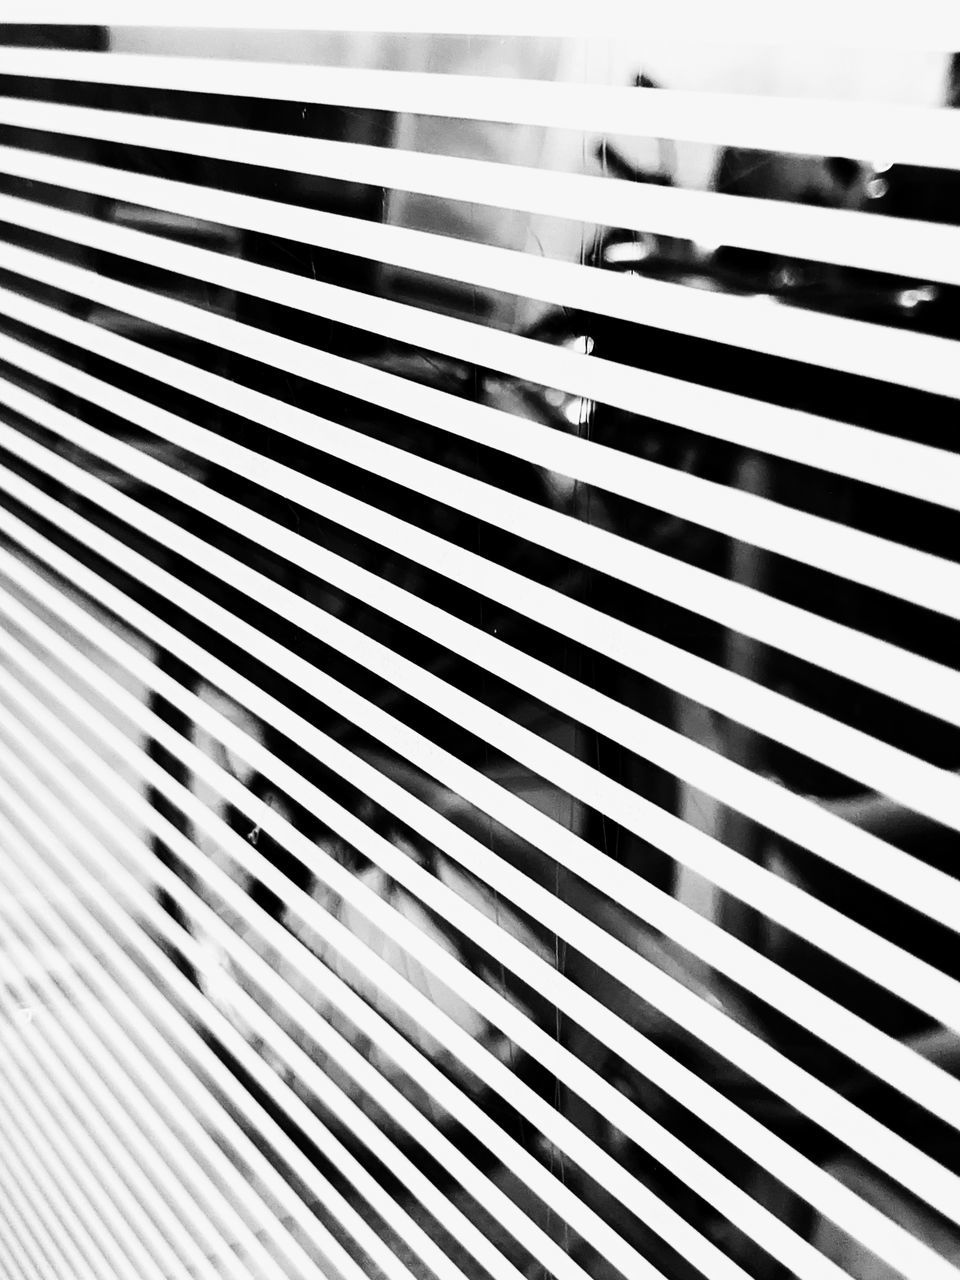 black and white, line, pattern, monochrome photography, striped, monochrome, no people, backgrounds, close-up, full frame, font, black, white, indoors, in a row, repetition